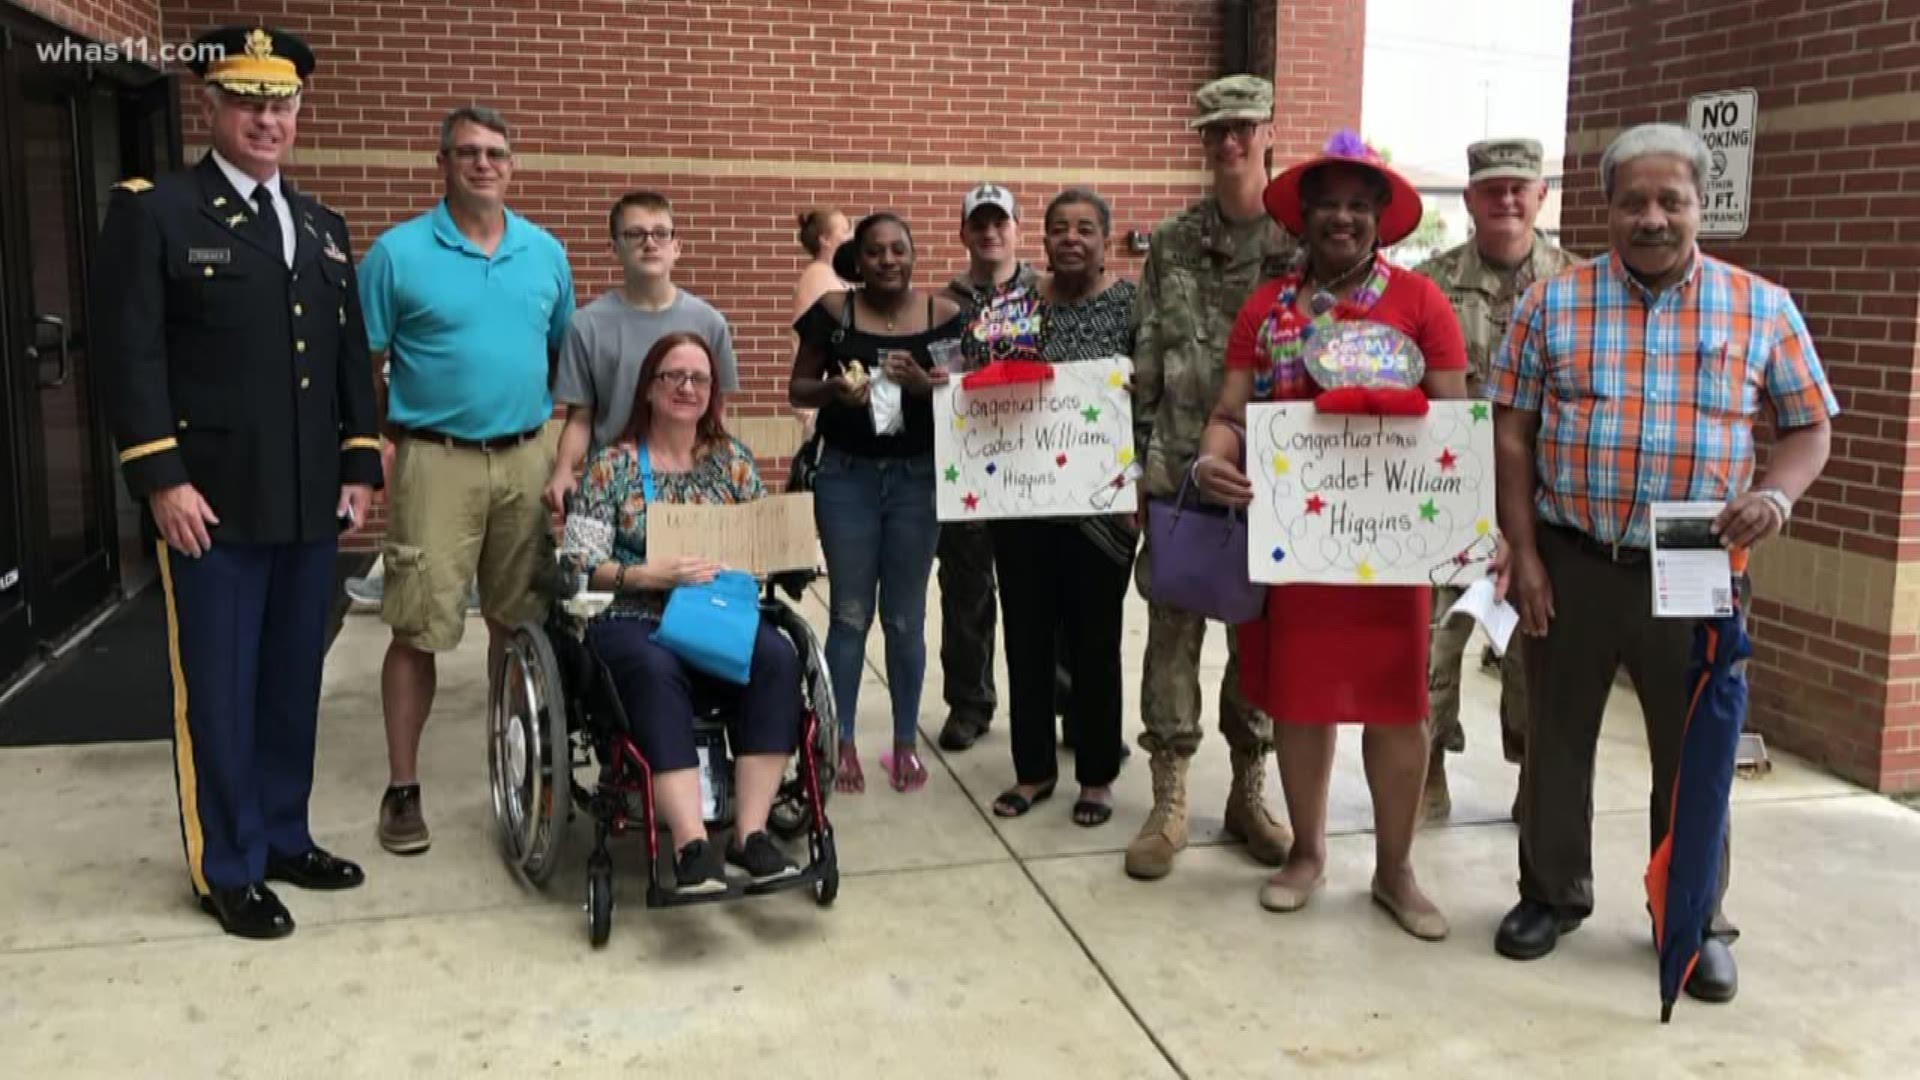 "Several of us wanted to show that he is part of a family here and show our support. We wanted to let him know that his mother is proud of him." - Karl Truman Veteran's Club